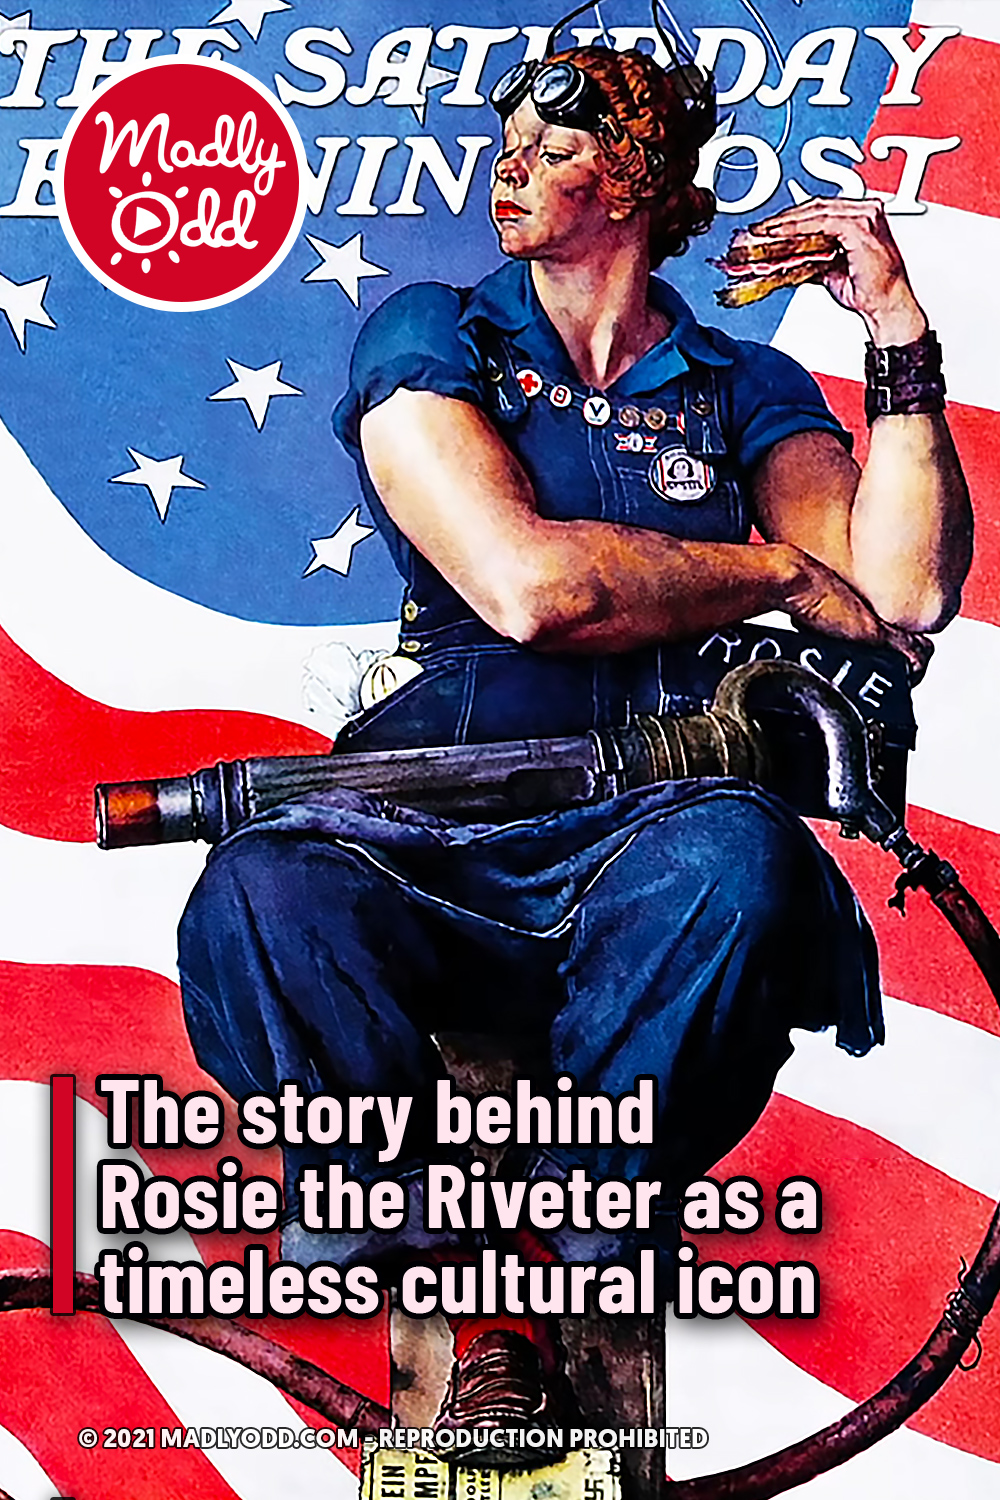 The story behind Rosie the Riveter as a timeless cultural icon